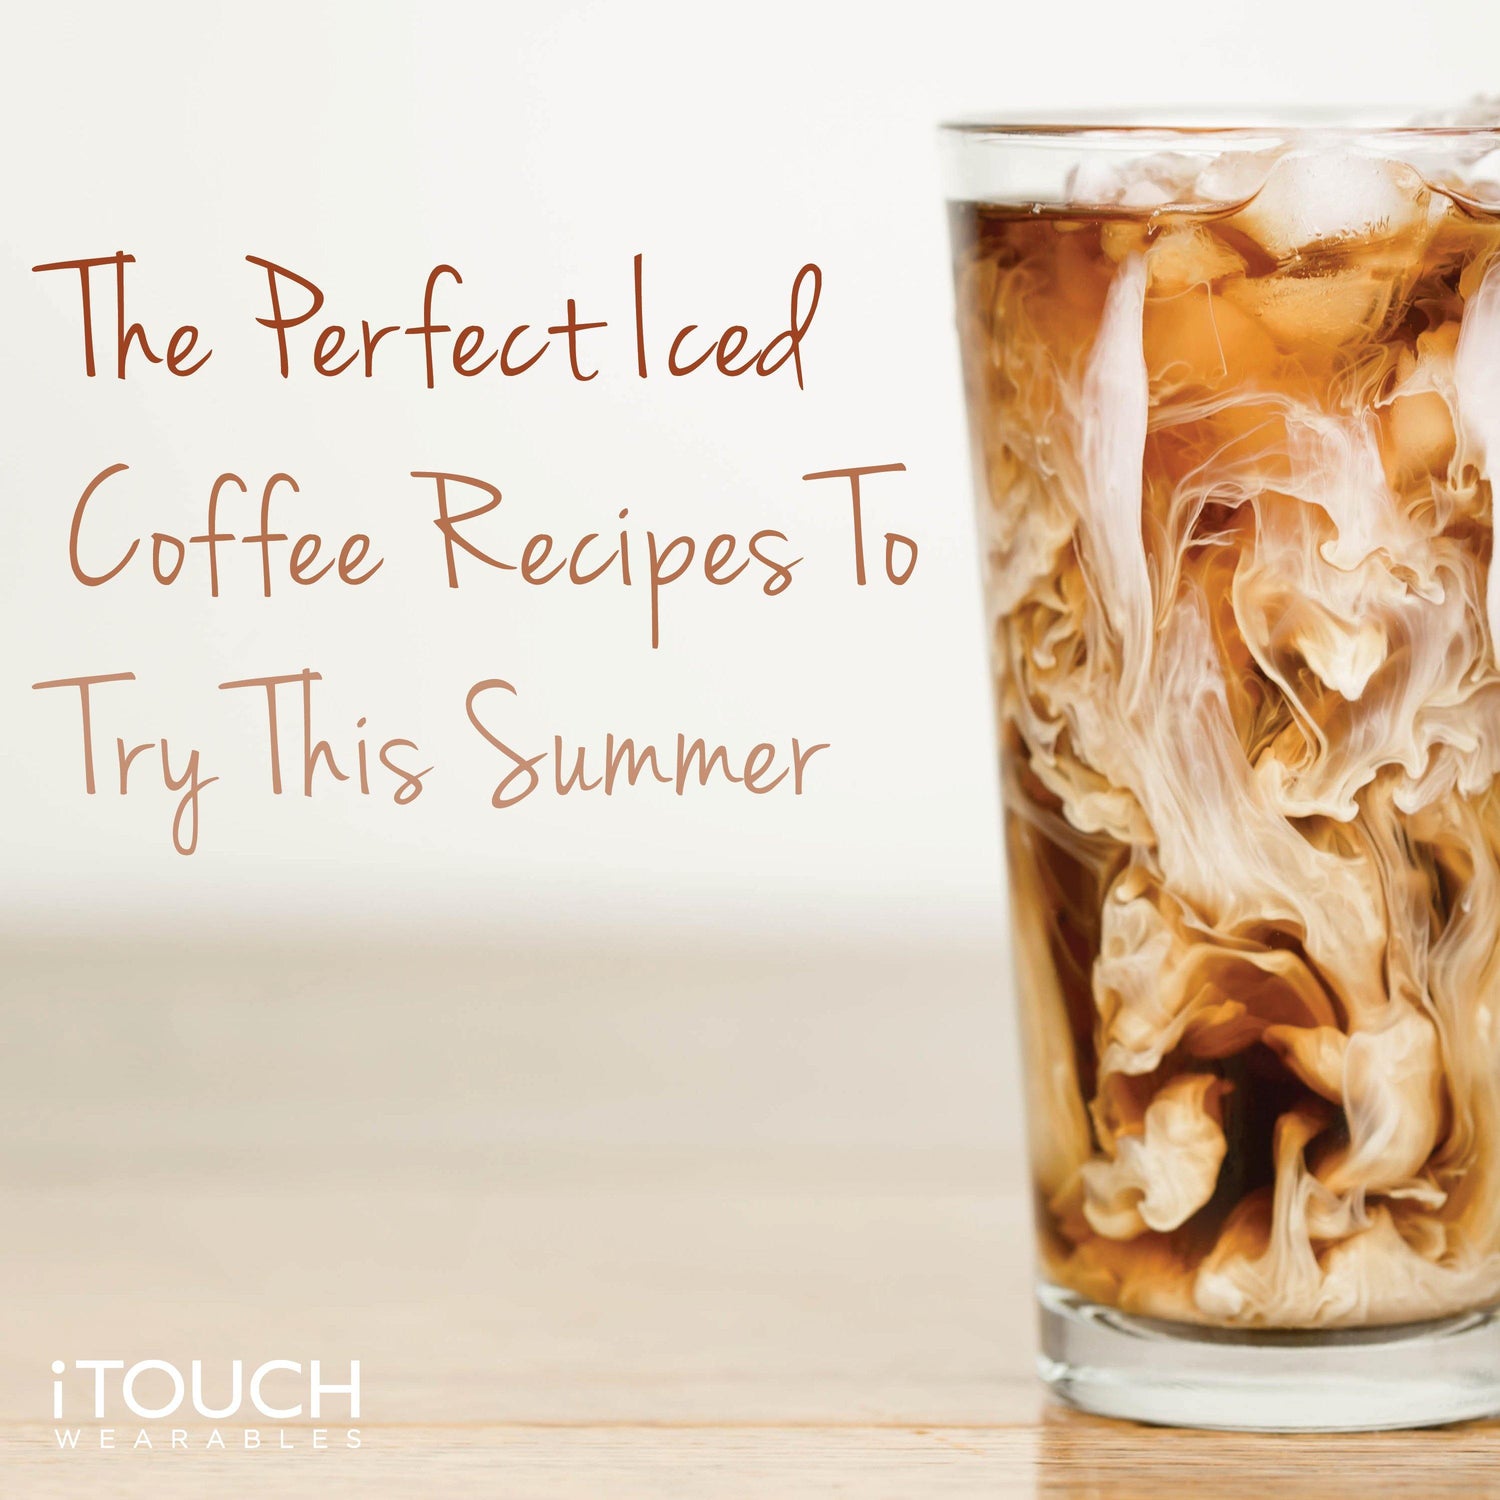 The Perfect Iced Coffee Recipes To Try This Summer - iTOUCH Wearables